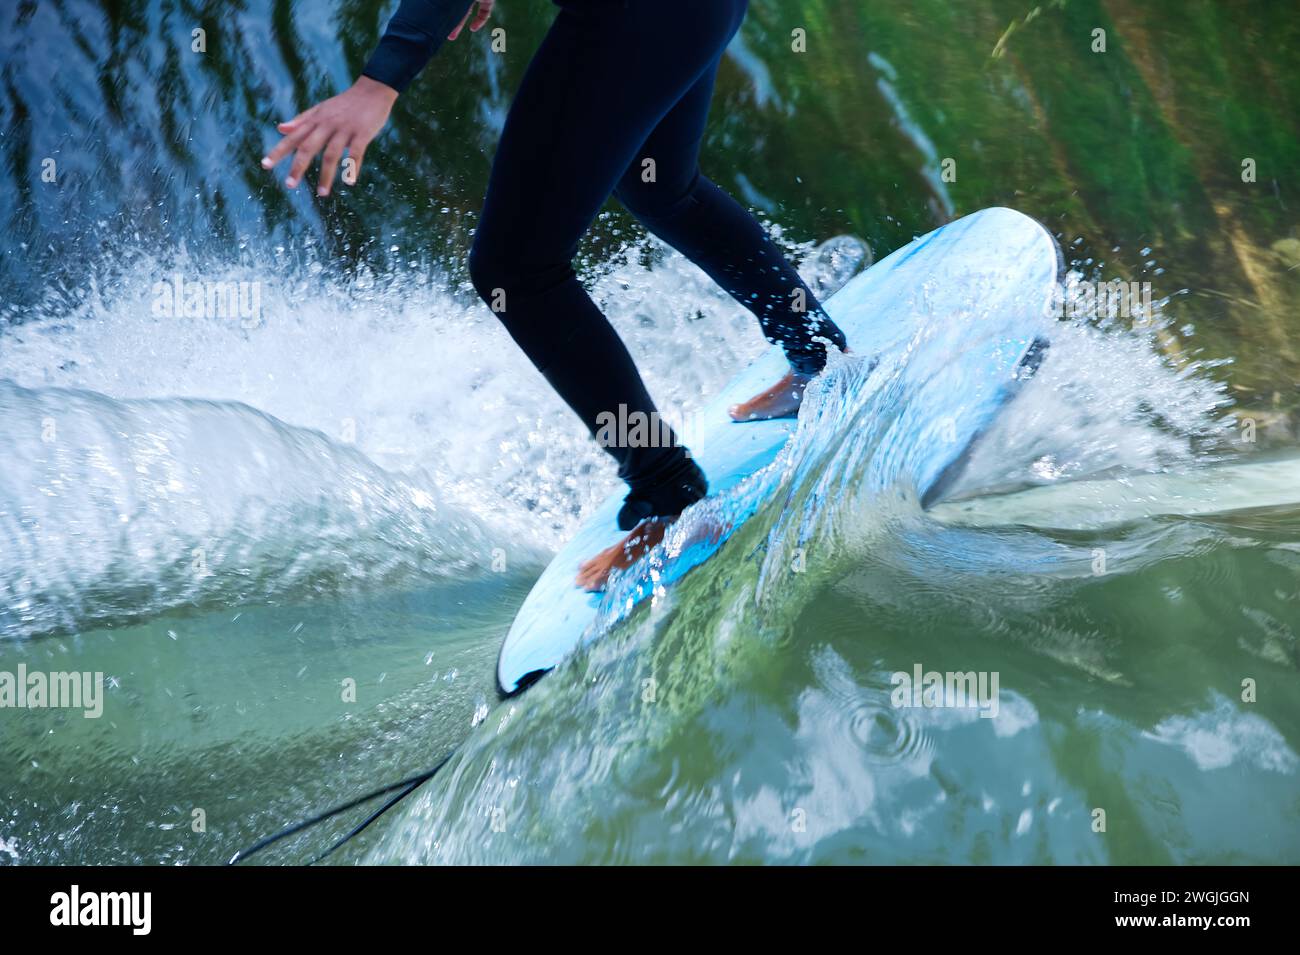 Bodypart of a surfer surfing on the flowings water of a river Stock Photo